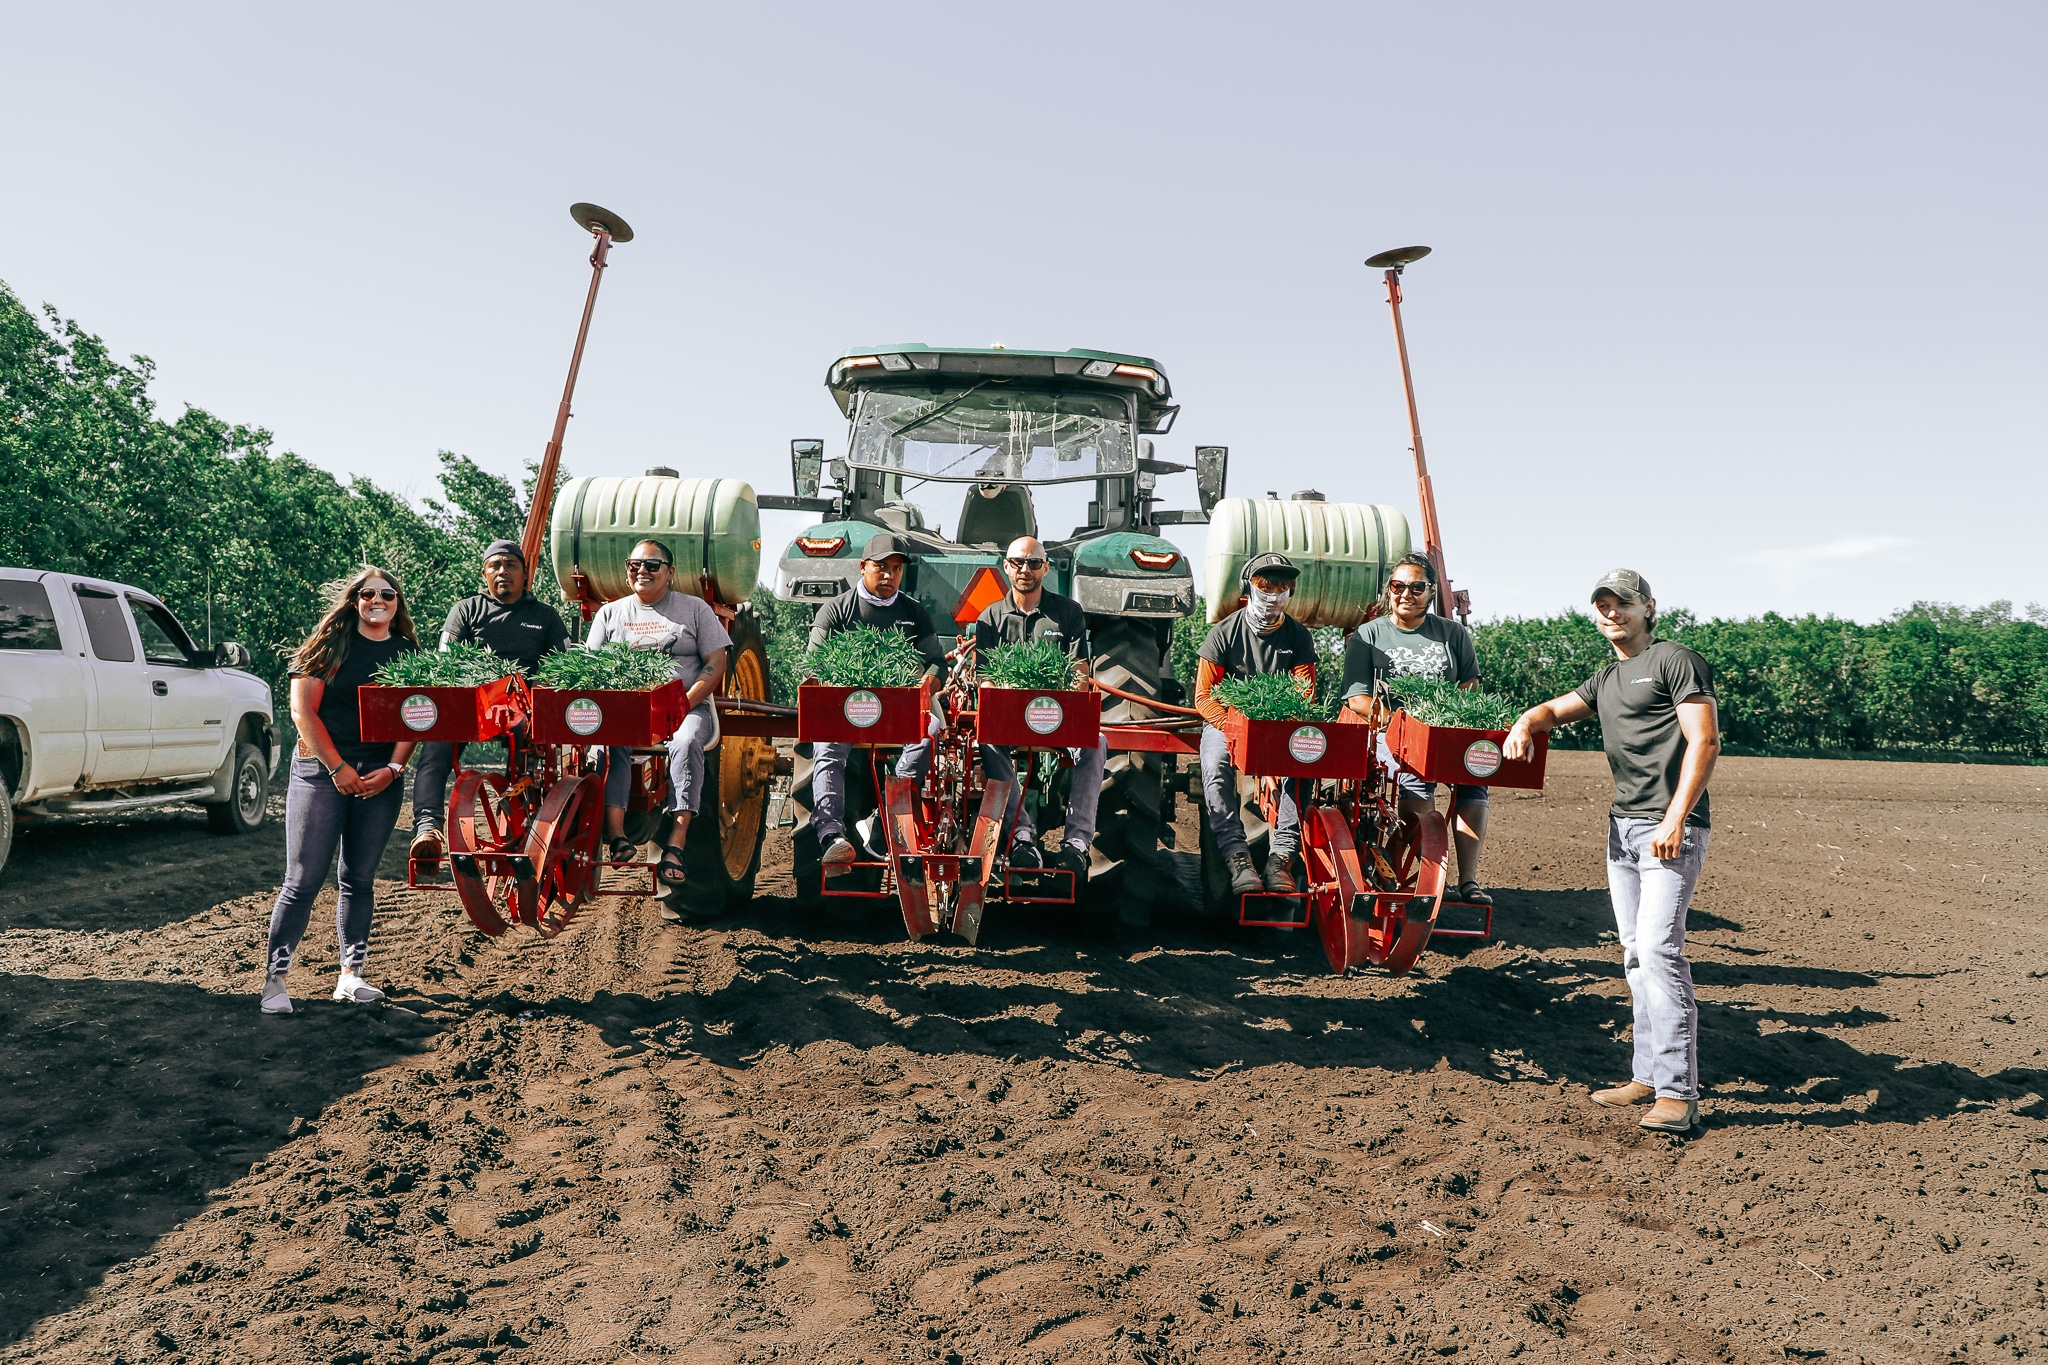 Featured image for “Ag Marvels Enters Exciting Partnership With Saginaw Chippewa Indian Tribe of Michigan, Planting 3 Acres of Industrial Hemp on Tribal Lands For Education and Medicinal Purposes”